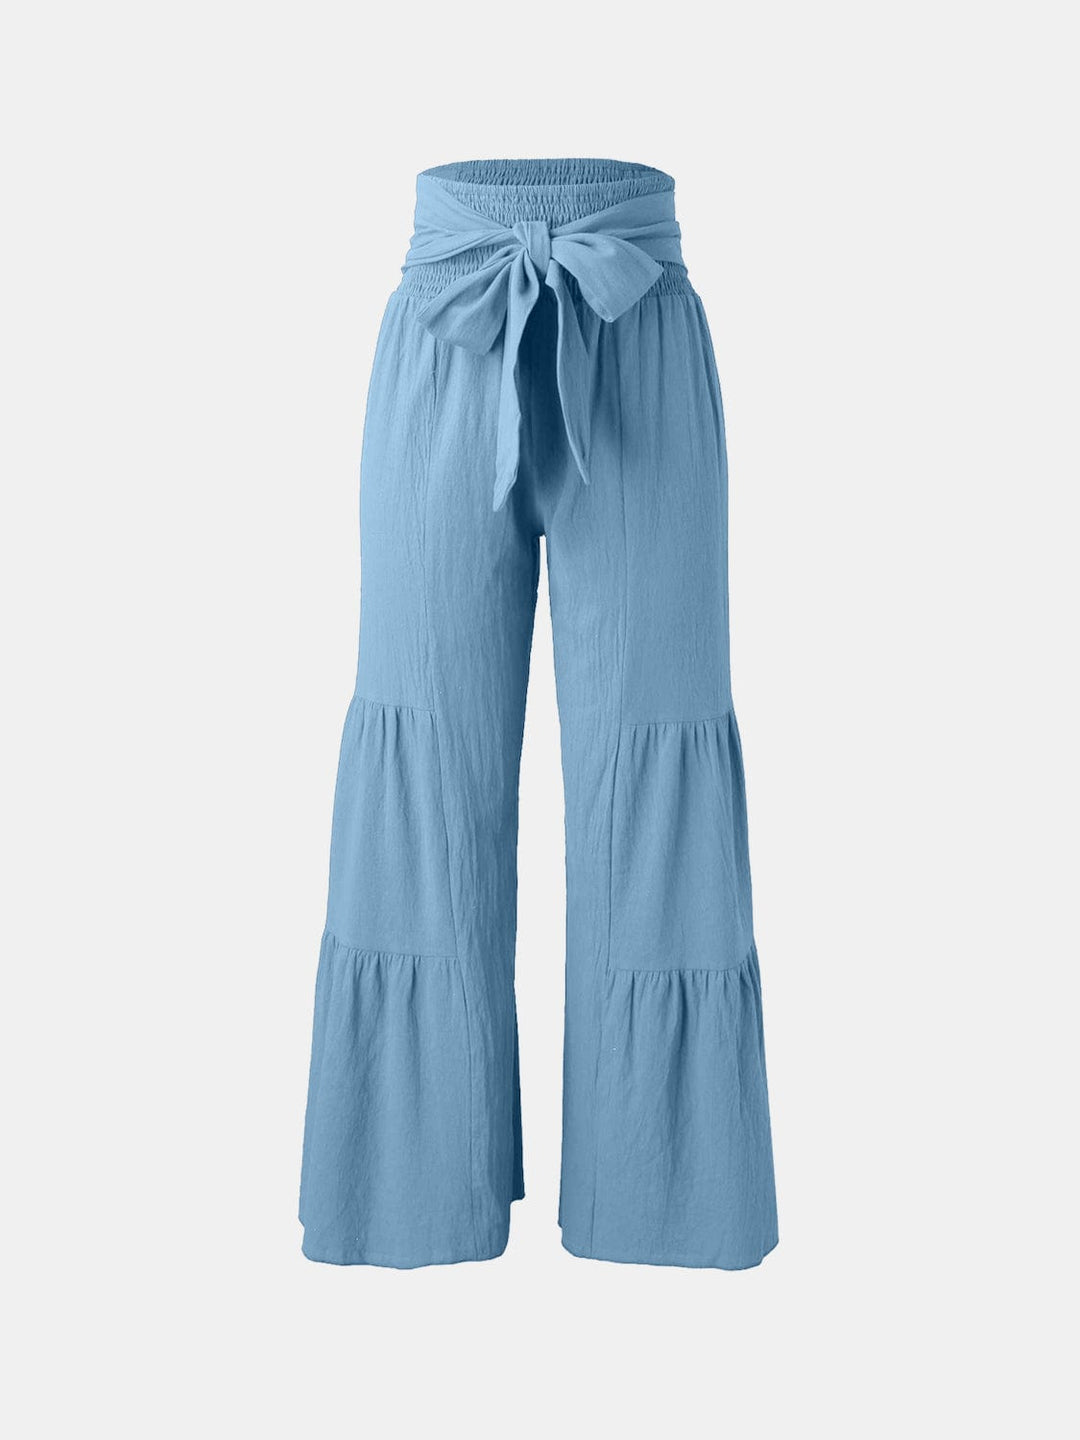 The802Gypsy Bottoms/Pants & Culotte Sky Blue / S GYPSY-Tied Ruched Wide Leg Pants